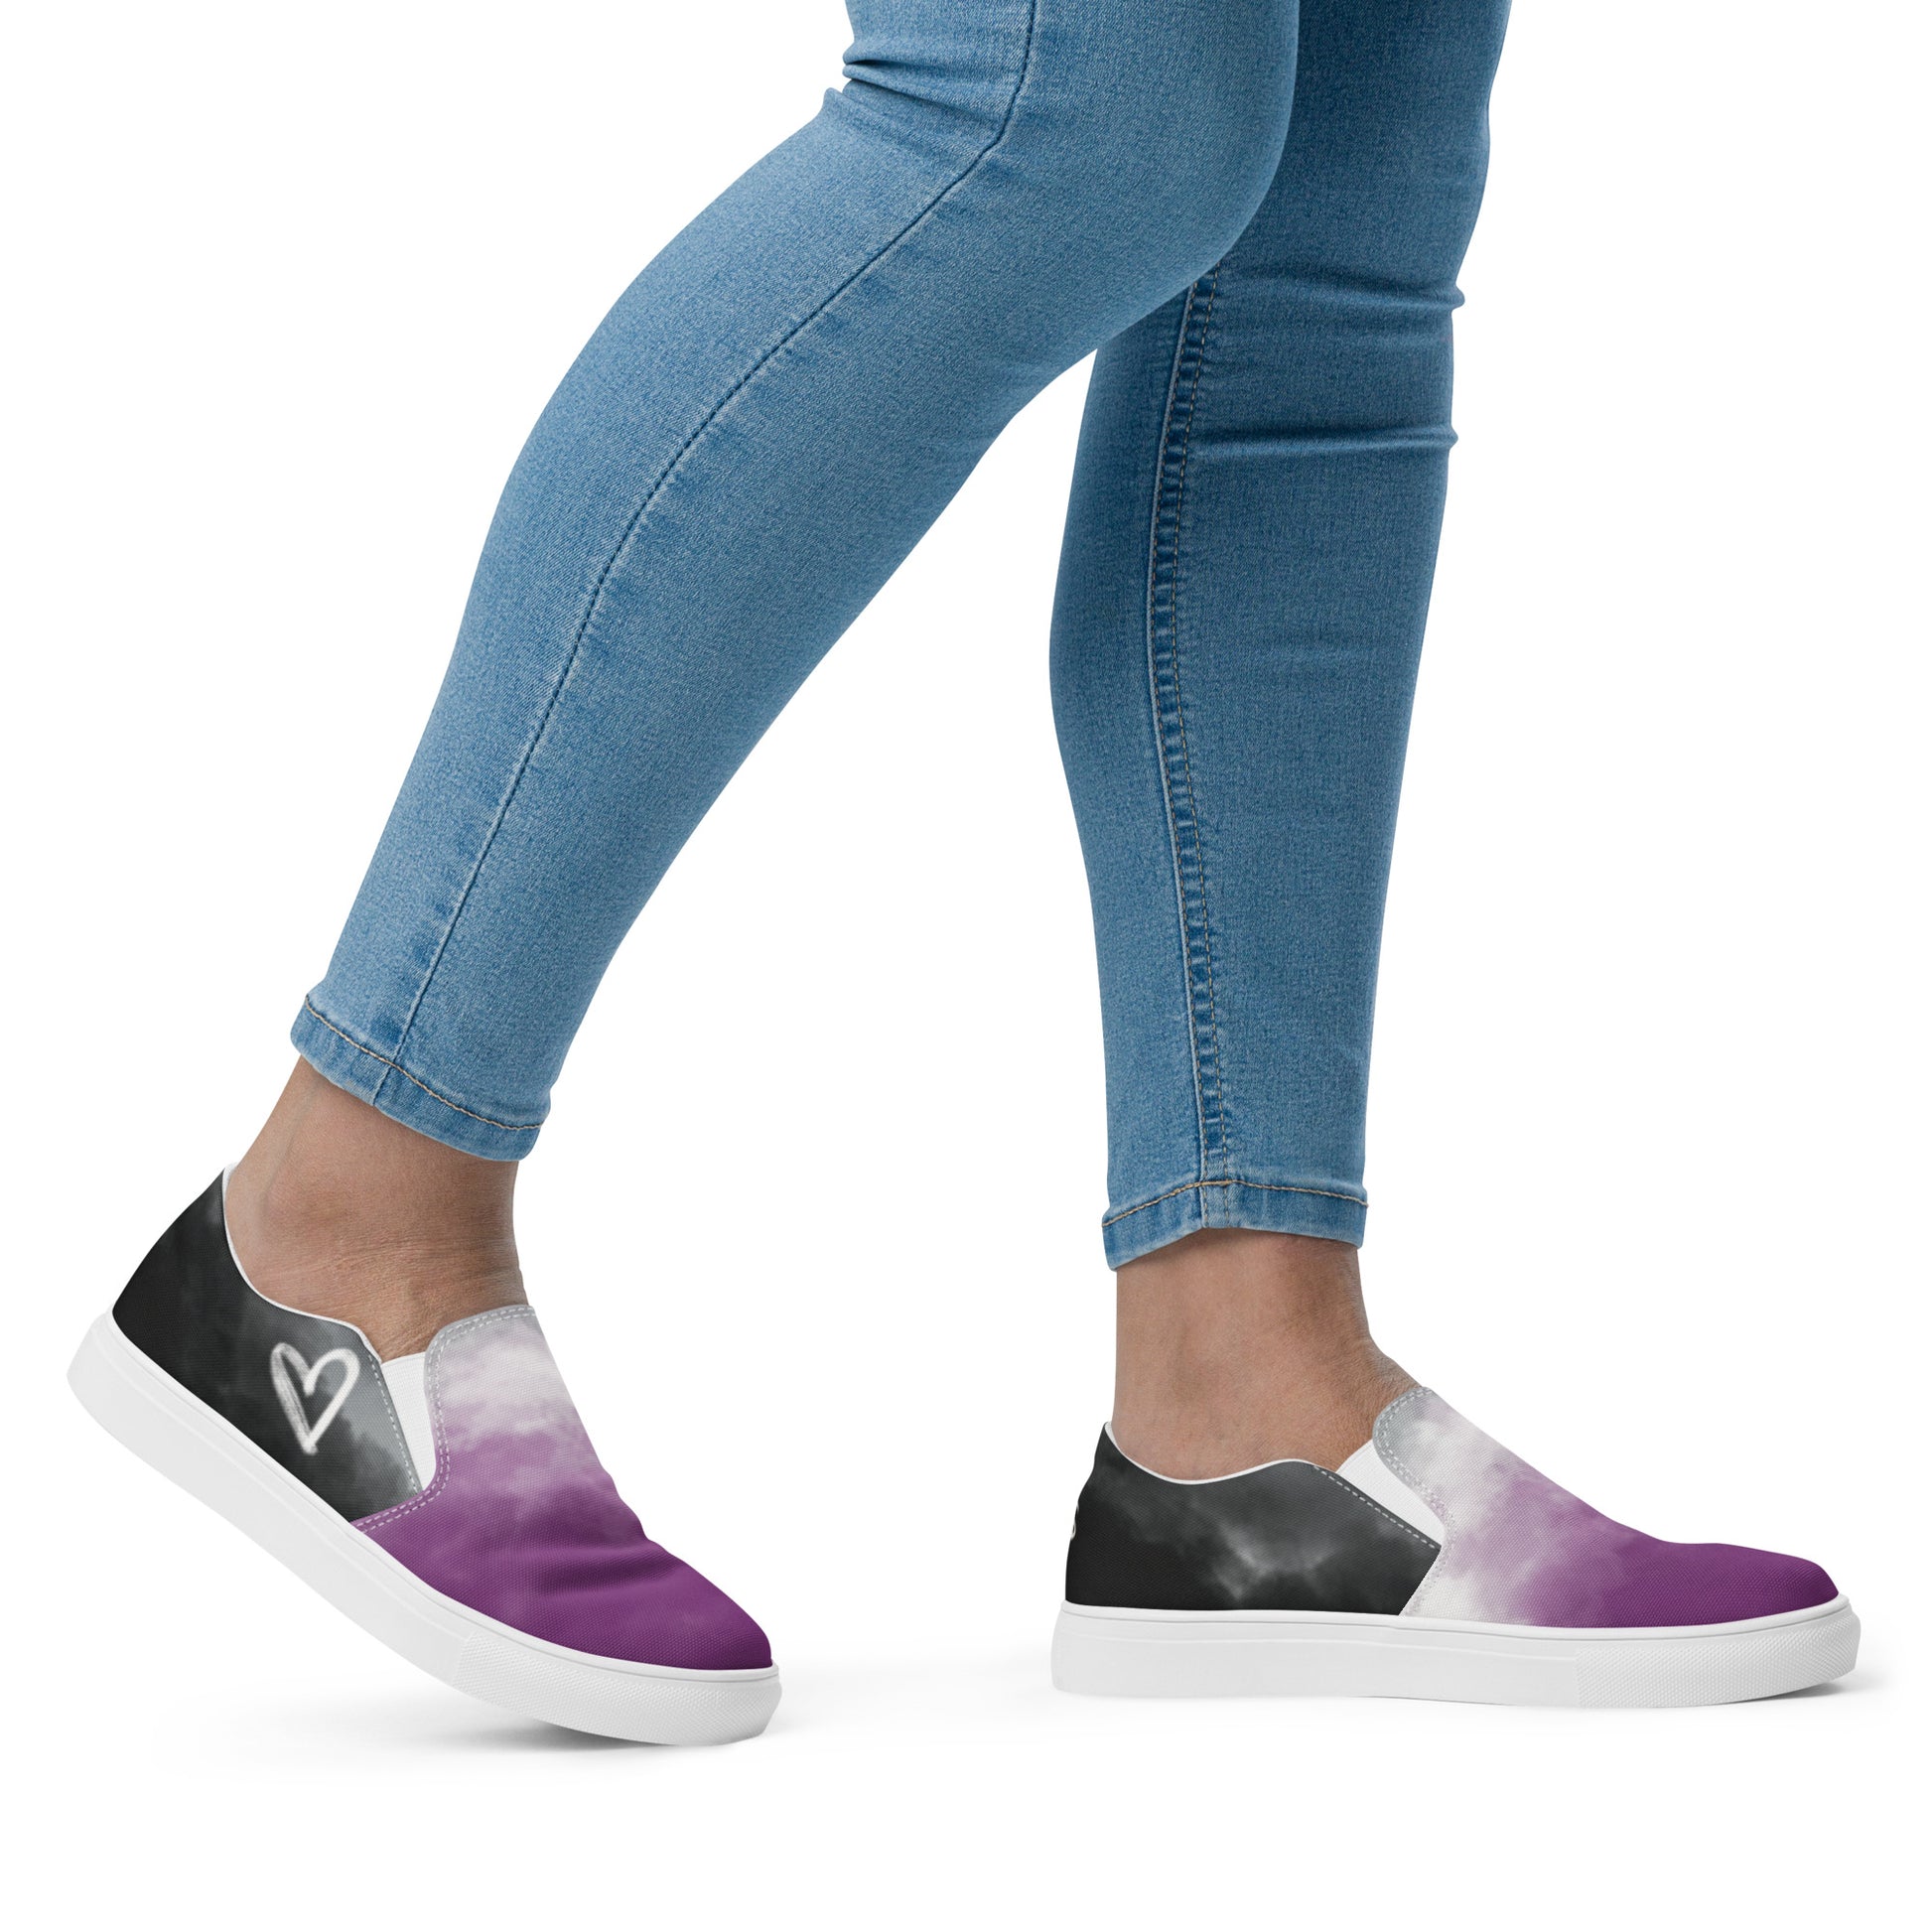 A model wears a pair of slip-on shoes with clouds in the asexual flag colors, a hand drawn white heart on the side, and the Aras Sivad Studio logo on the back.